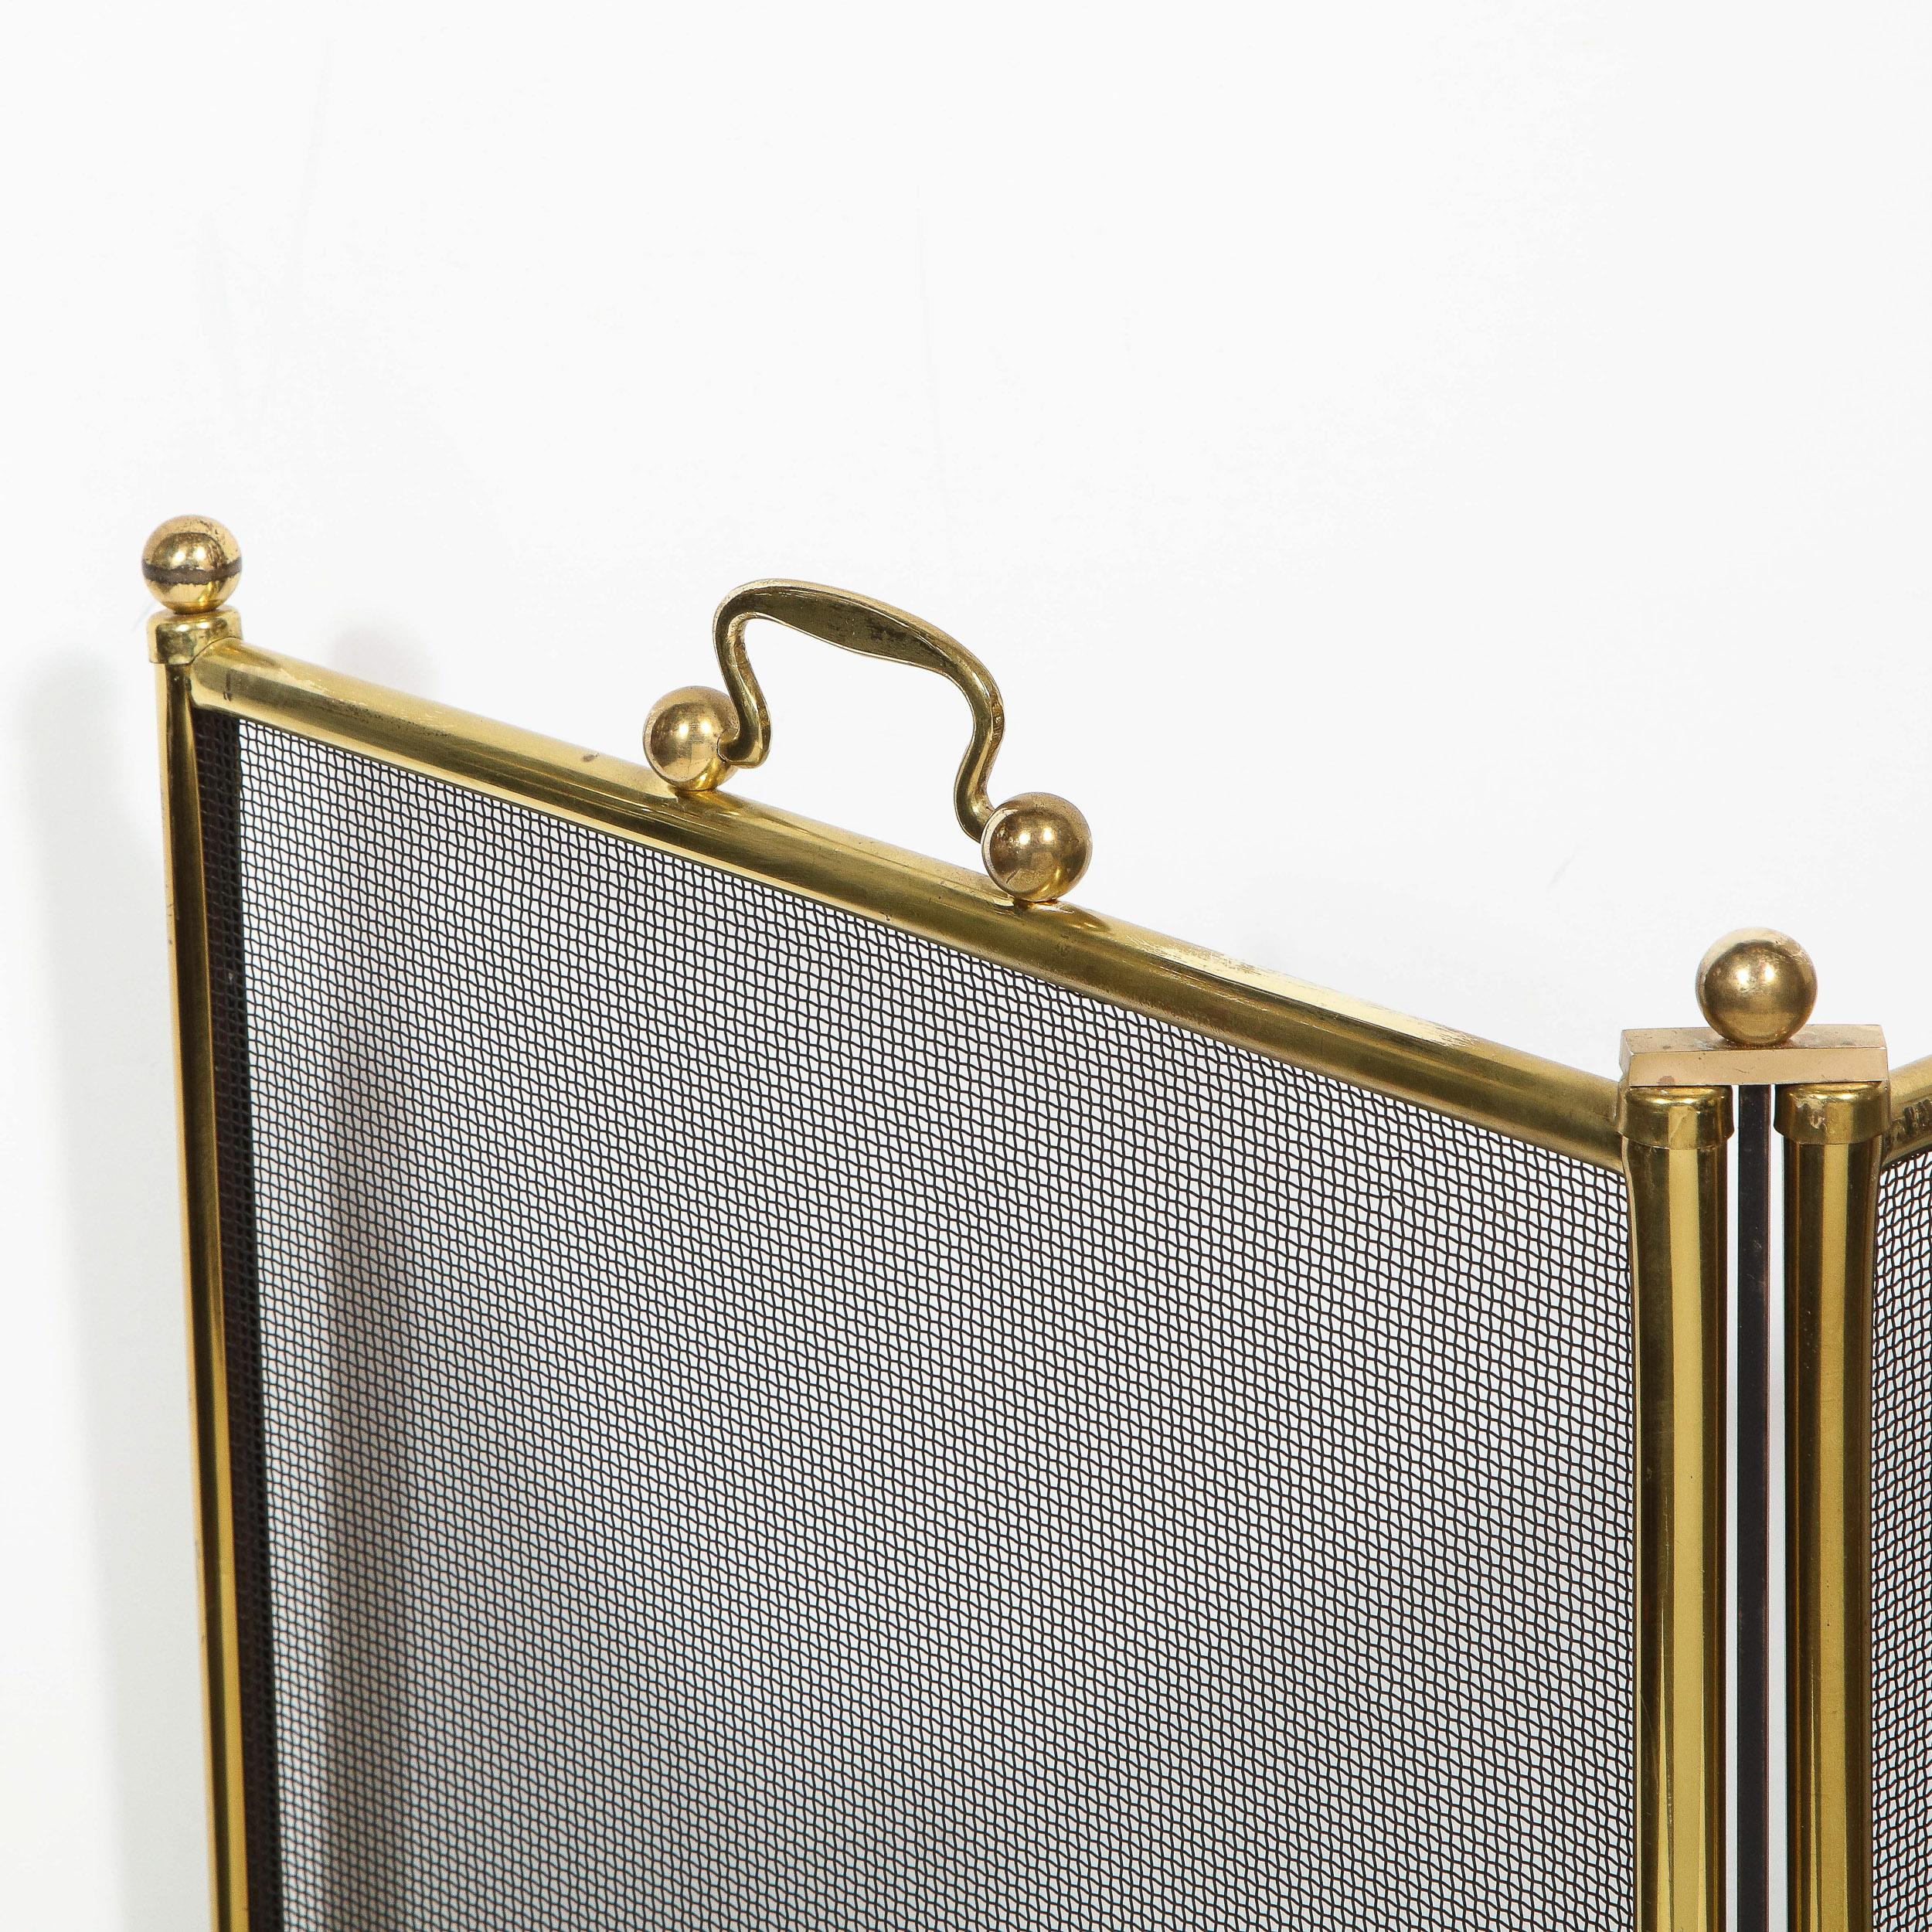 This elegant Mid-Century Modern four panel fire screen was realized in the United States, circa 1960. It features four panels with tubular brass perimeters and black mesh interiors. The joints connecting each of the panels are crowned with a